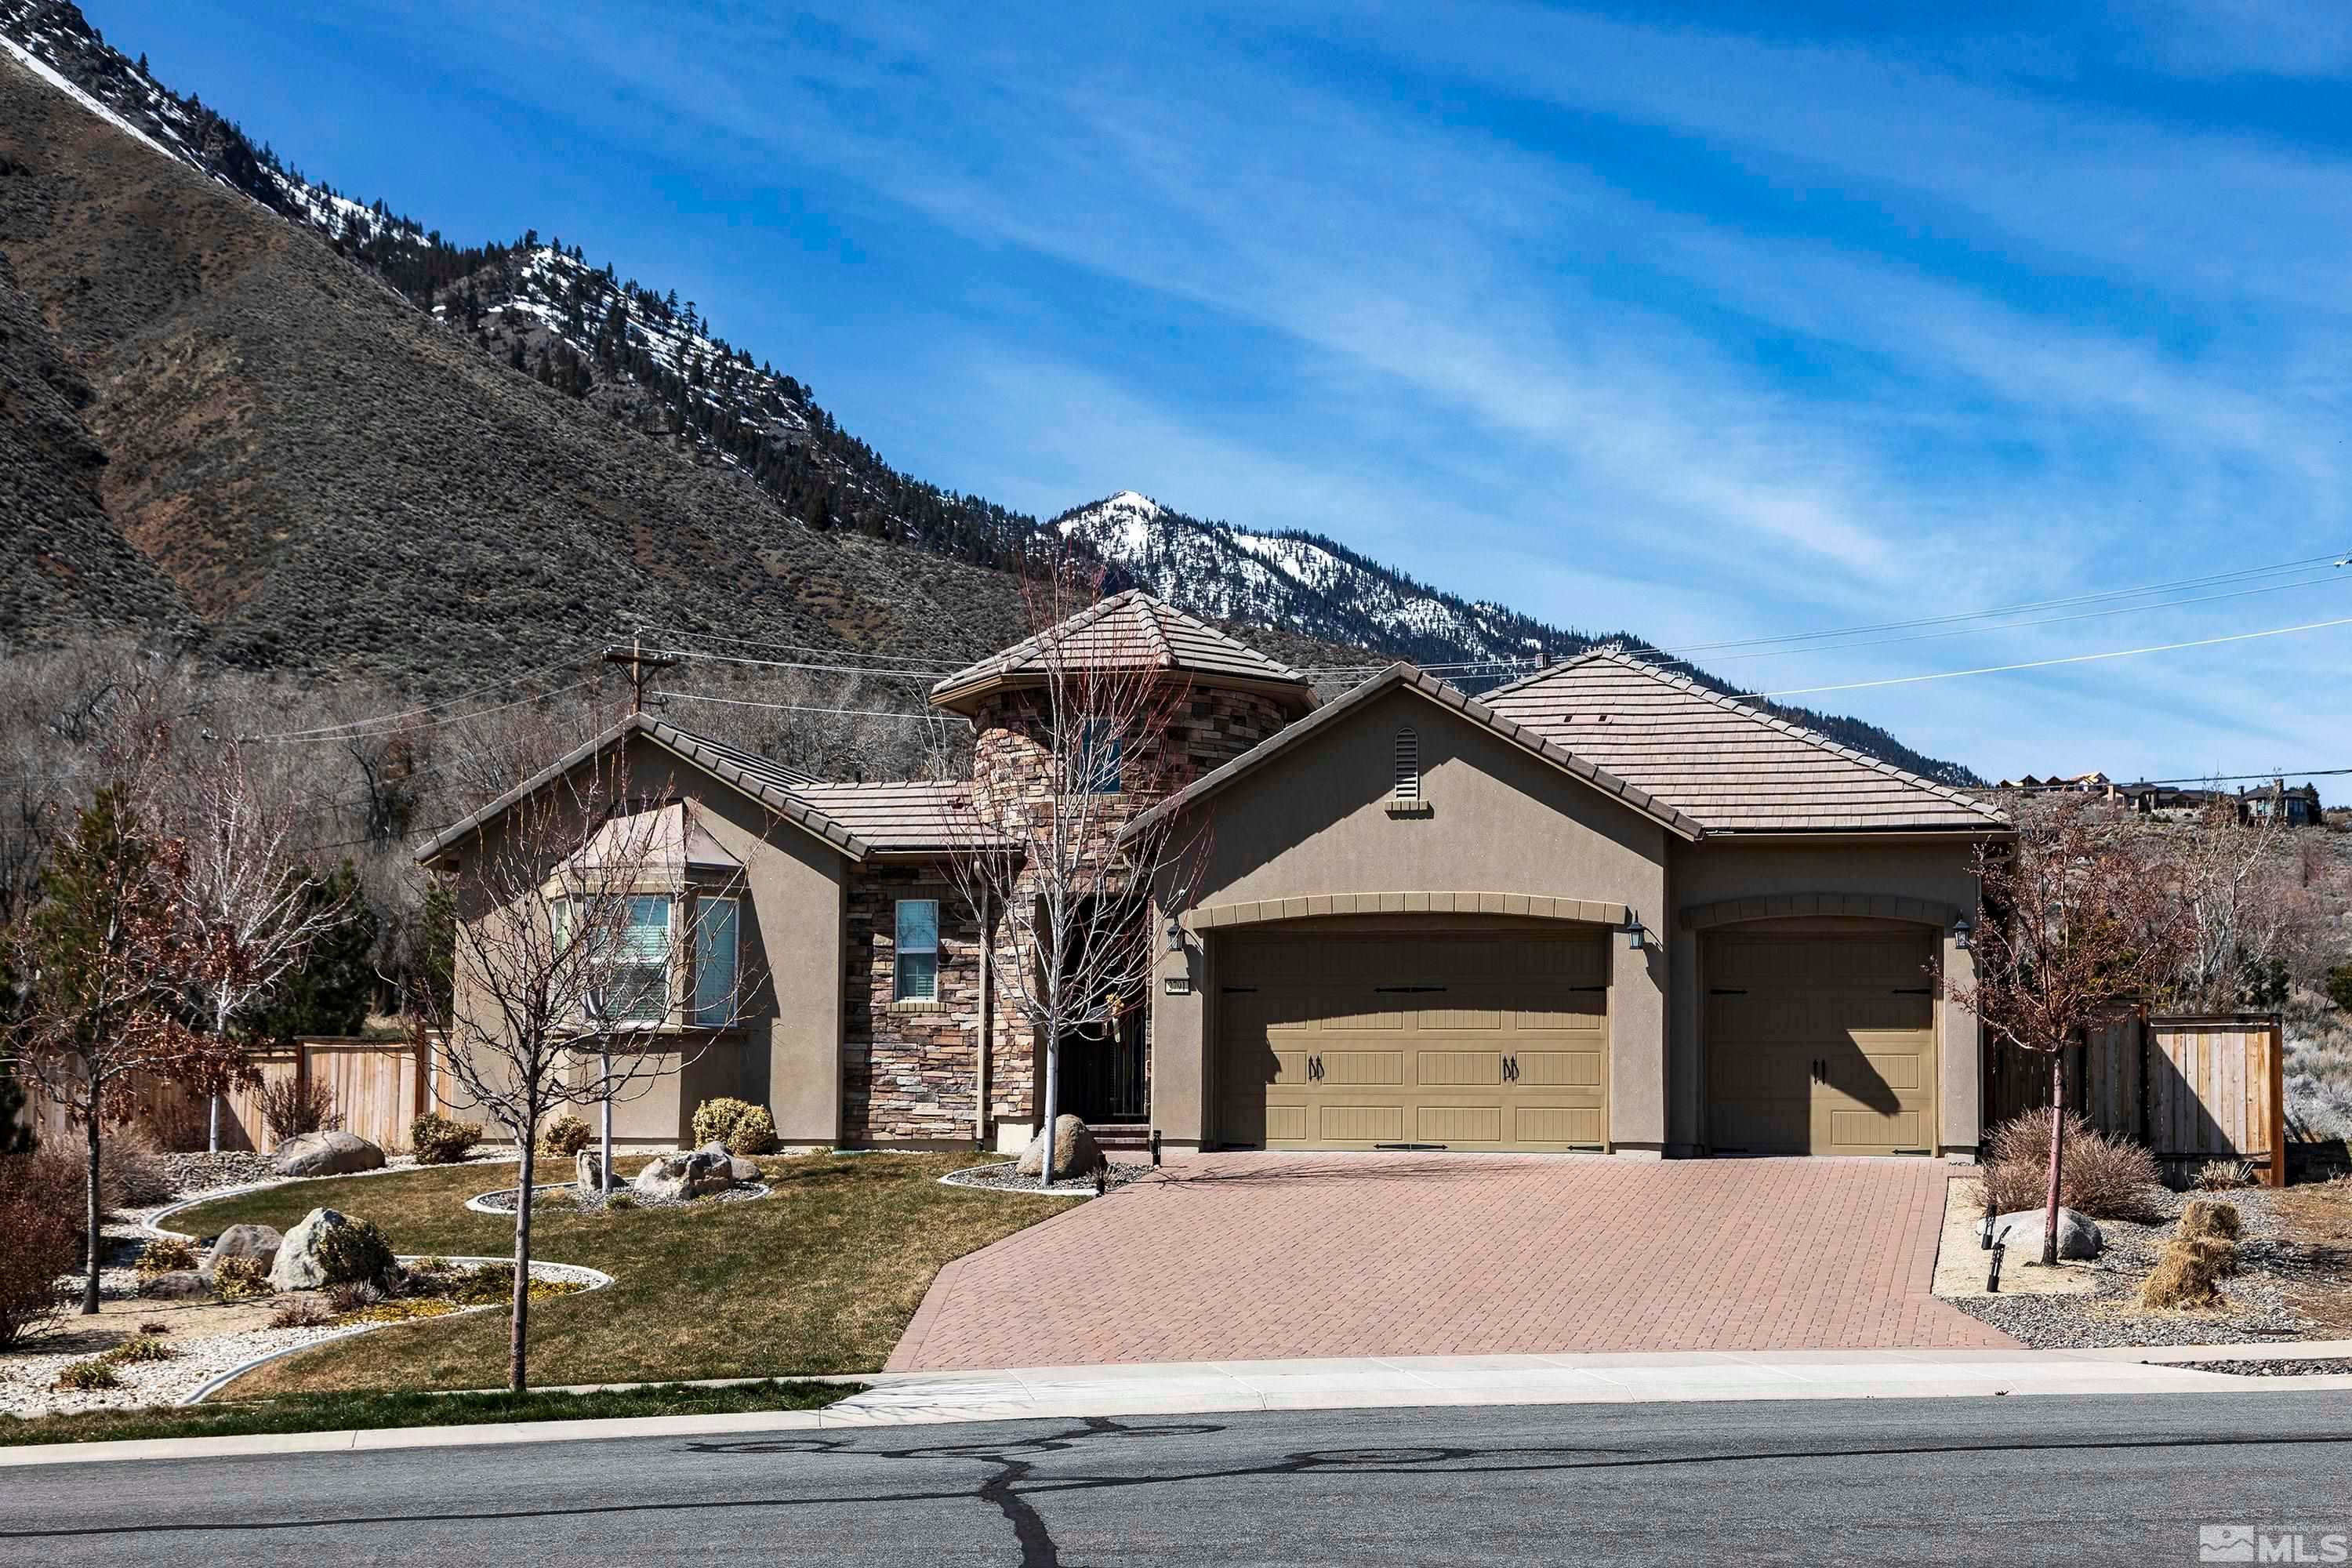 2791 Voight Canyon, Genoa, Nevada, 89411, United States, 3 Bedrooms Bedrooms, ,4 BathroomsBathrooms,Residential,For Sale,2791 Voight Canyon,1491108